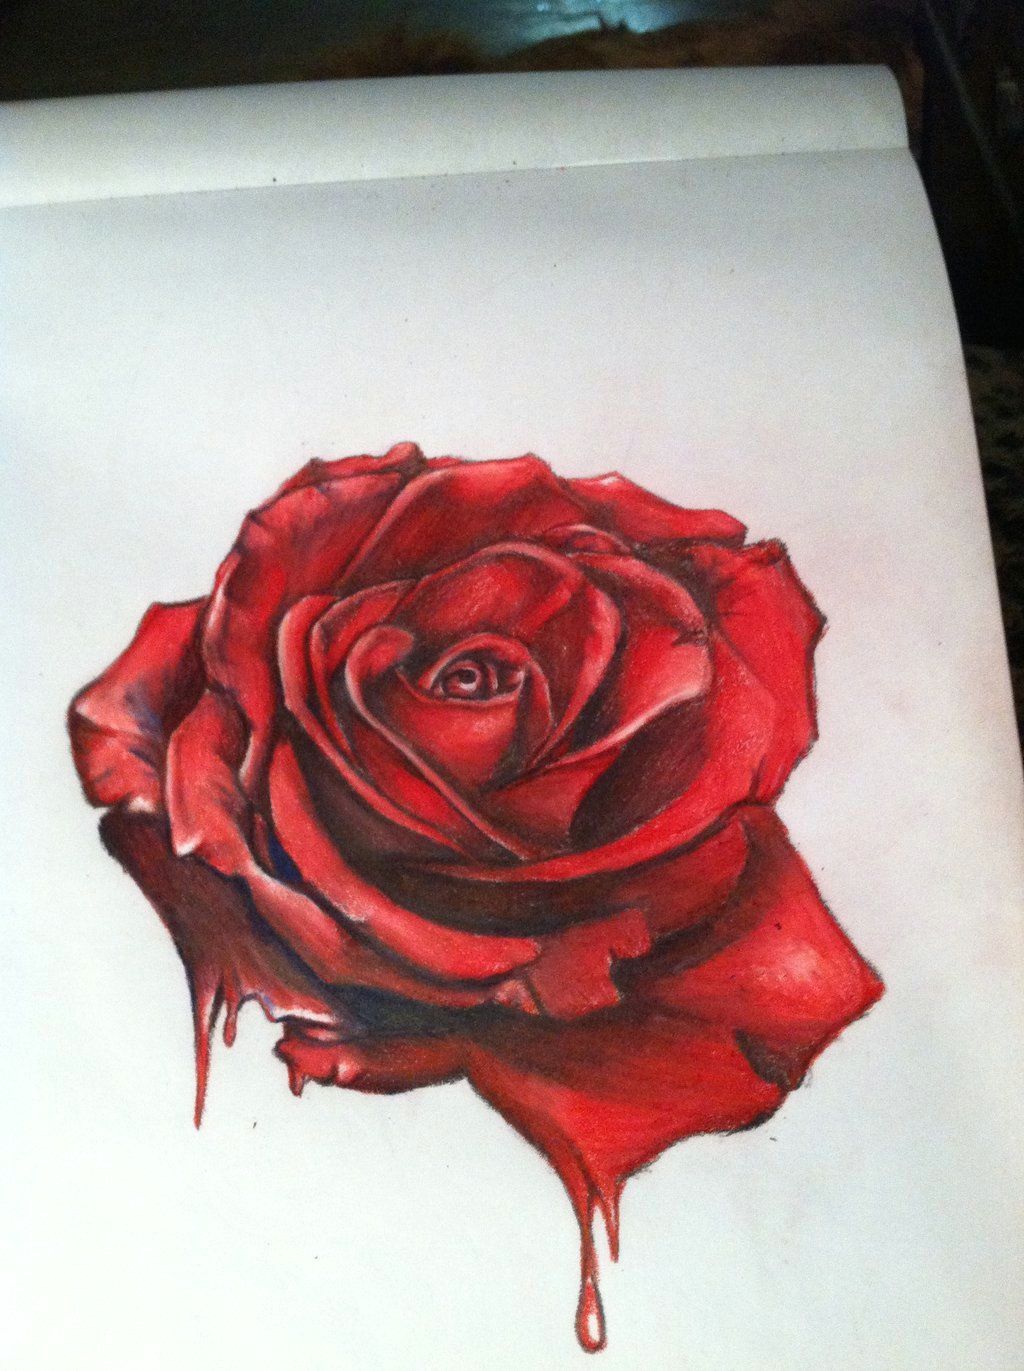 realism rose drawing realistic red rose drawing hyper surrealistic rose by